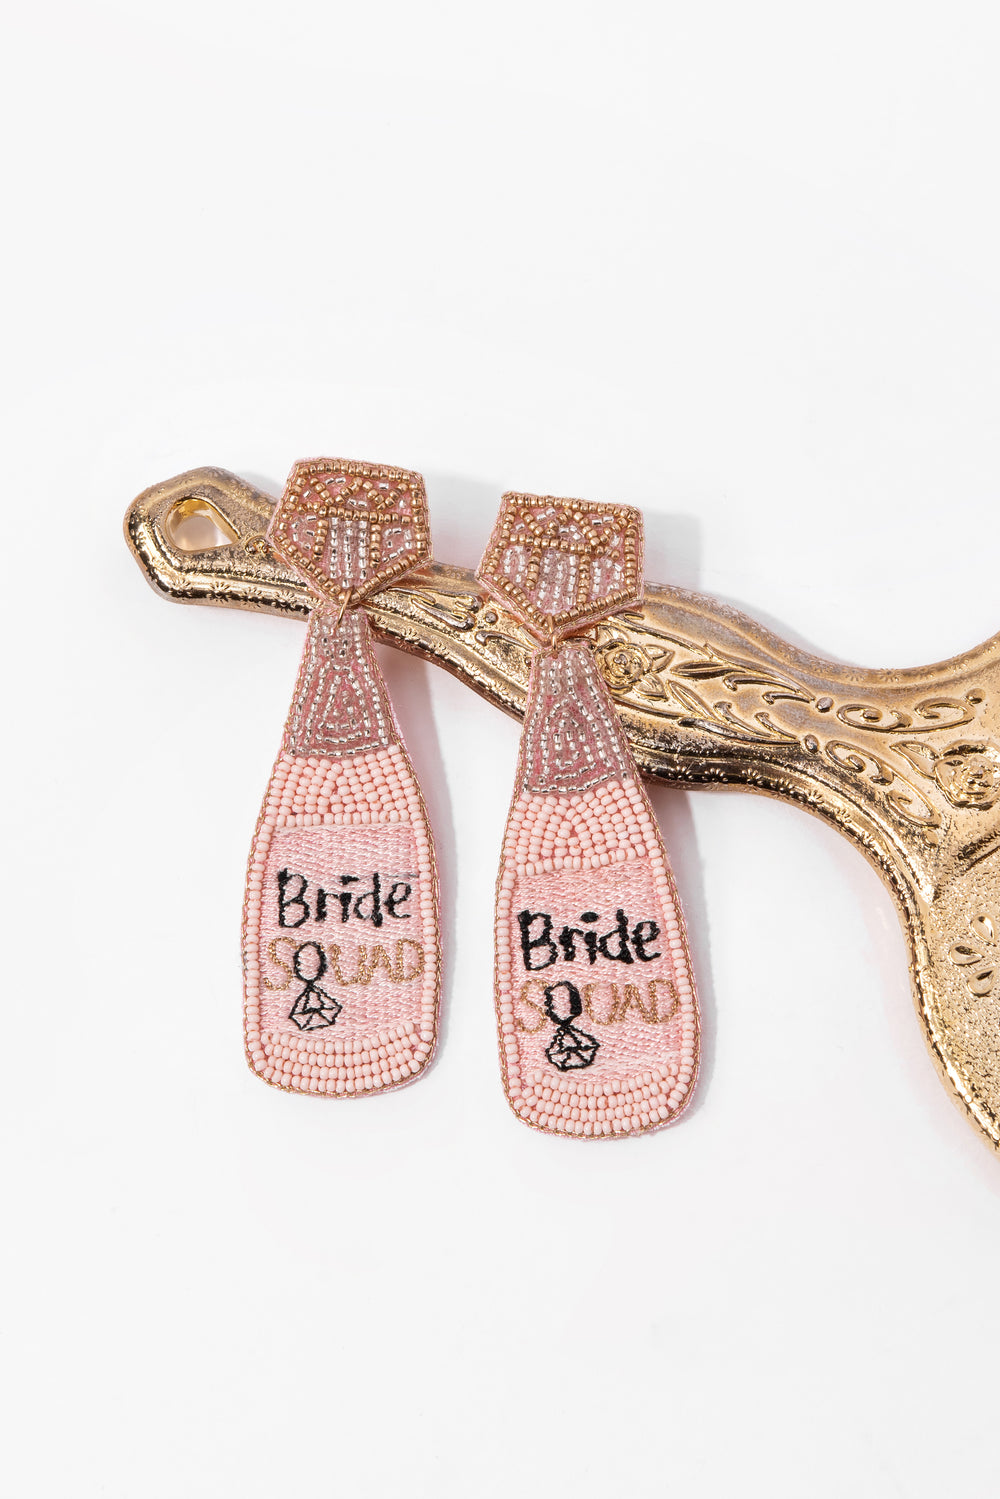 Beaded Bride SQUAD Champagne Post Earrings - Pink